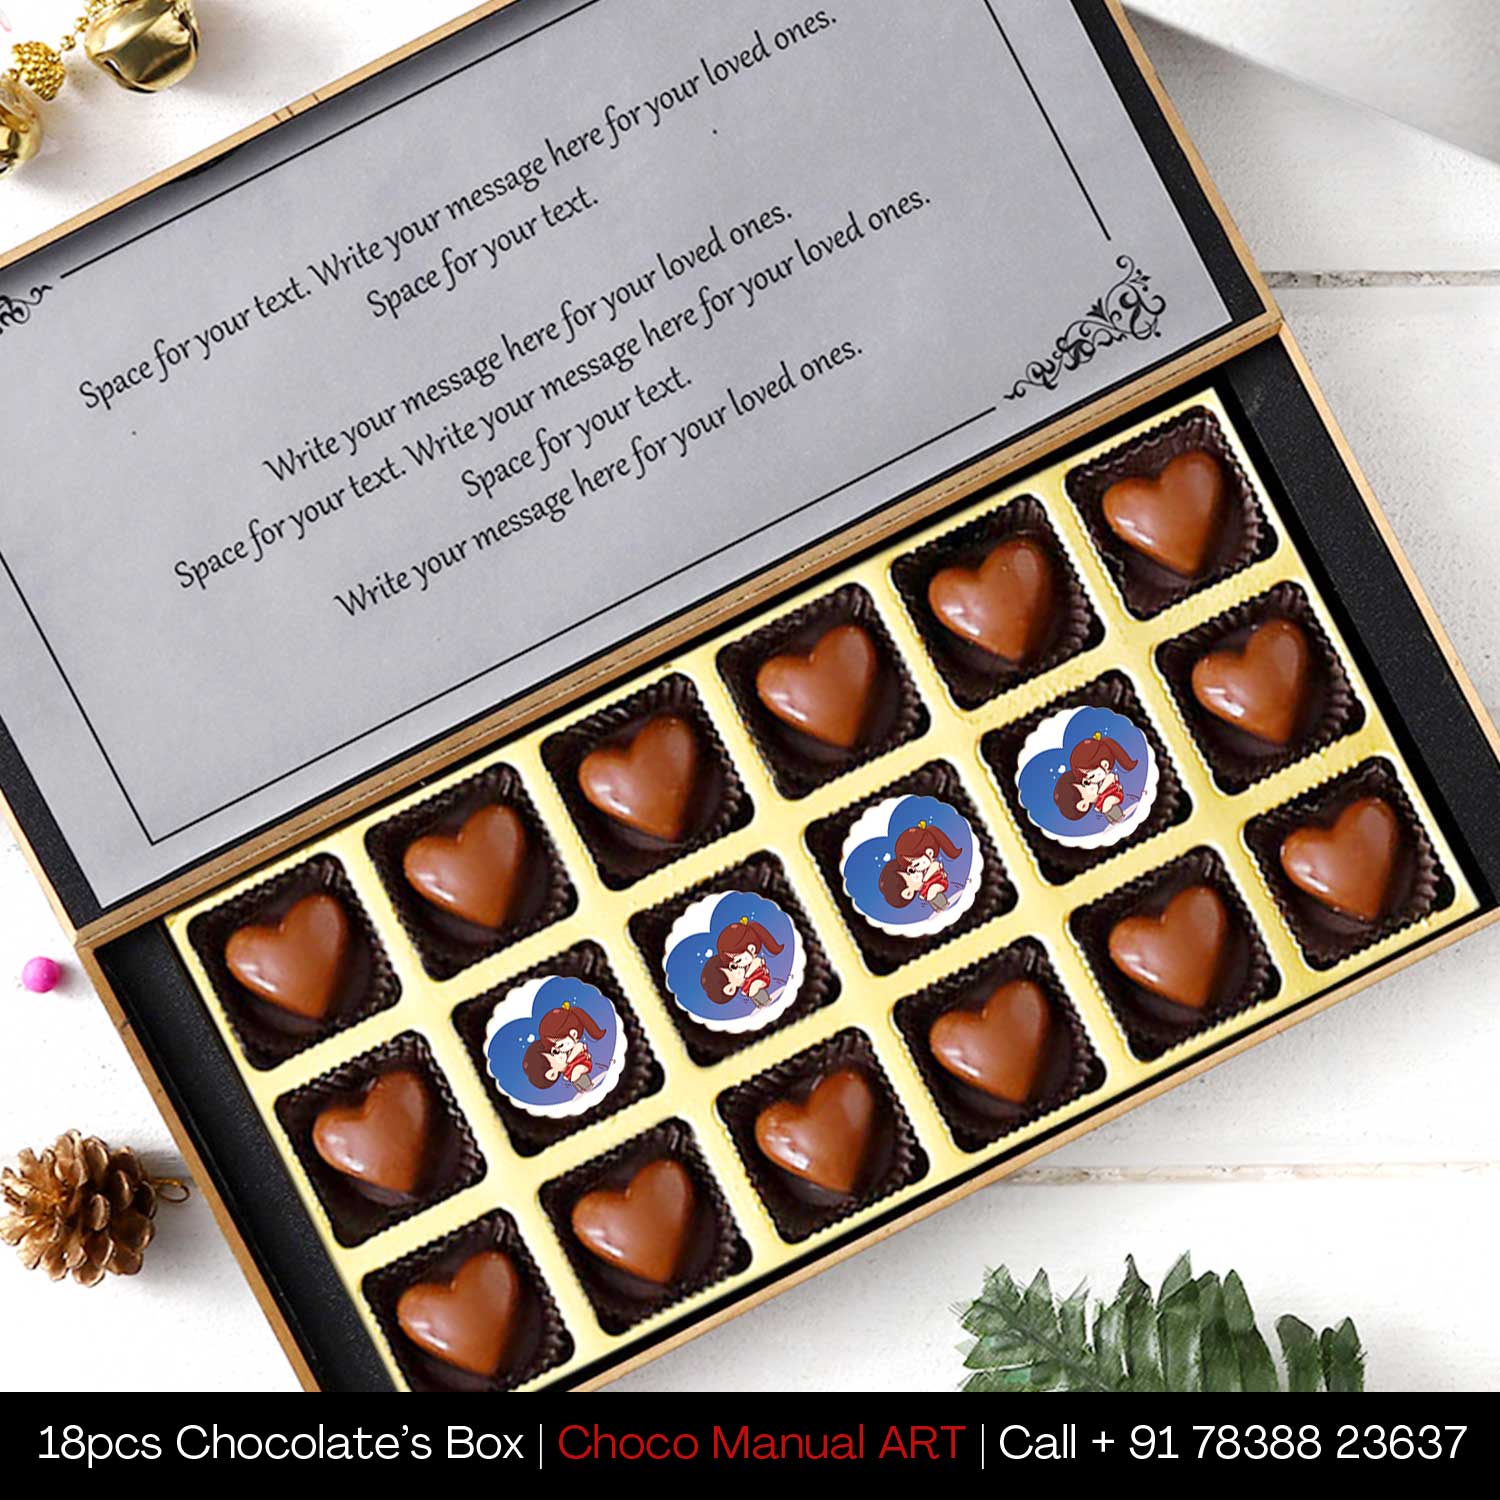 Personalized Kiss Day chocolate gift with photo/name printed